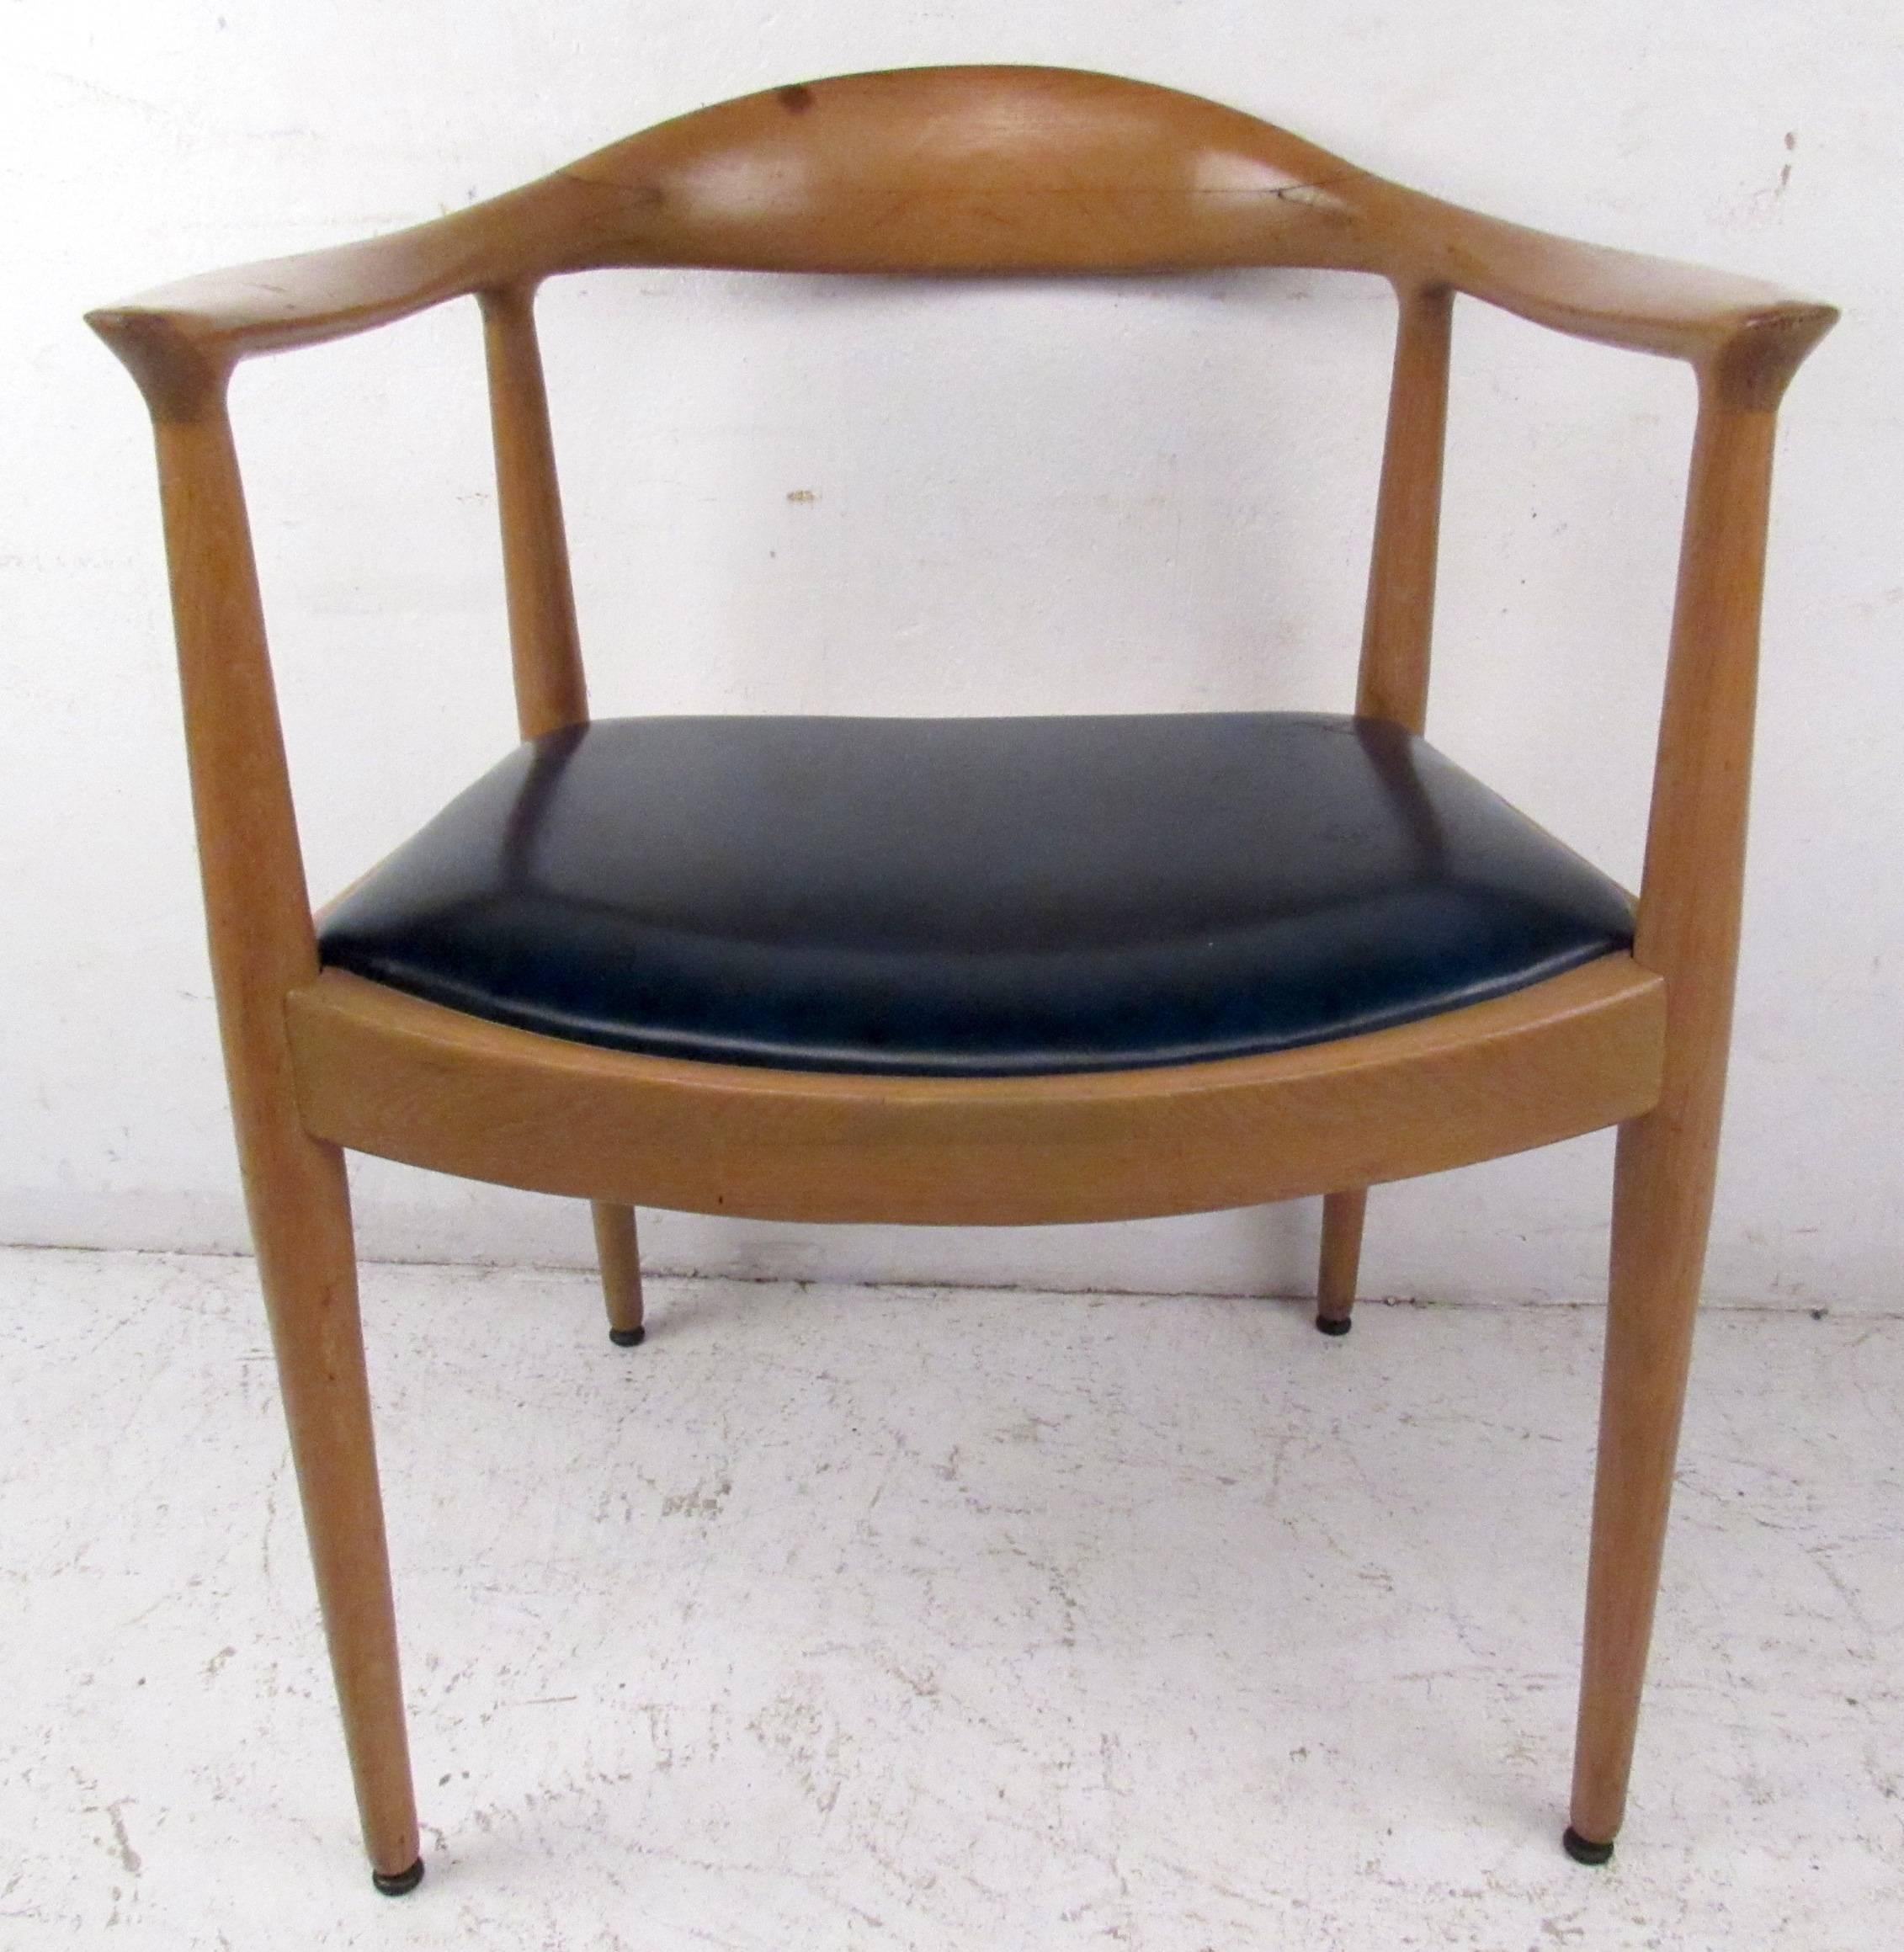 Vintage-modern armchair featuring vinyl seat and sculpted oak body, designed by Barrit Furniture Corporation. Perfect desk chair or dining chair, please confirm item location (NY or NJ).